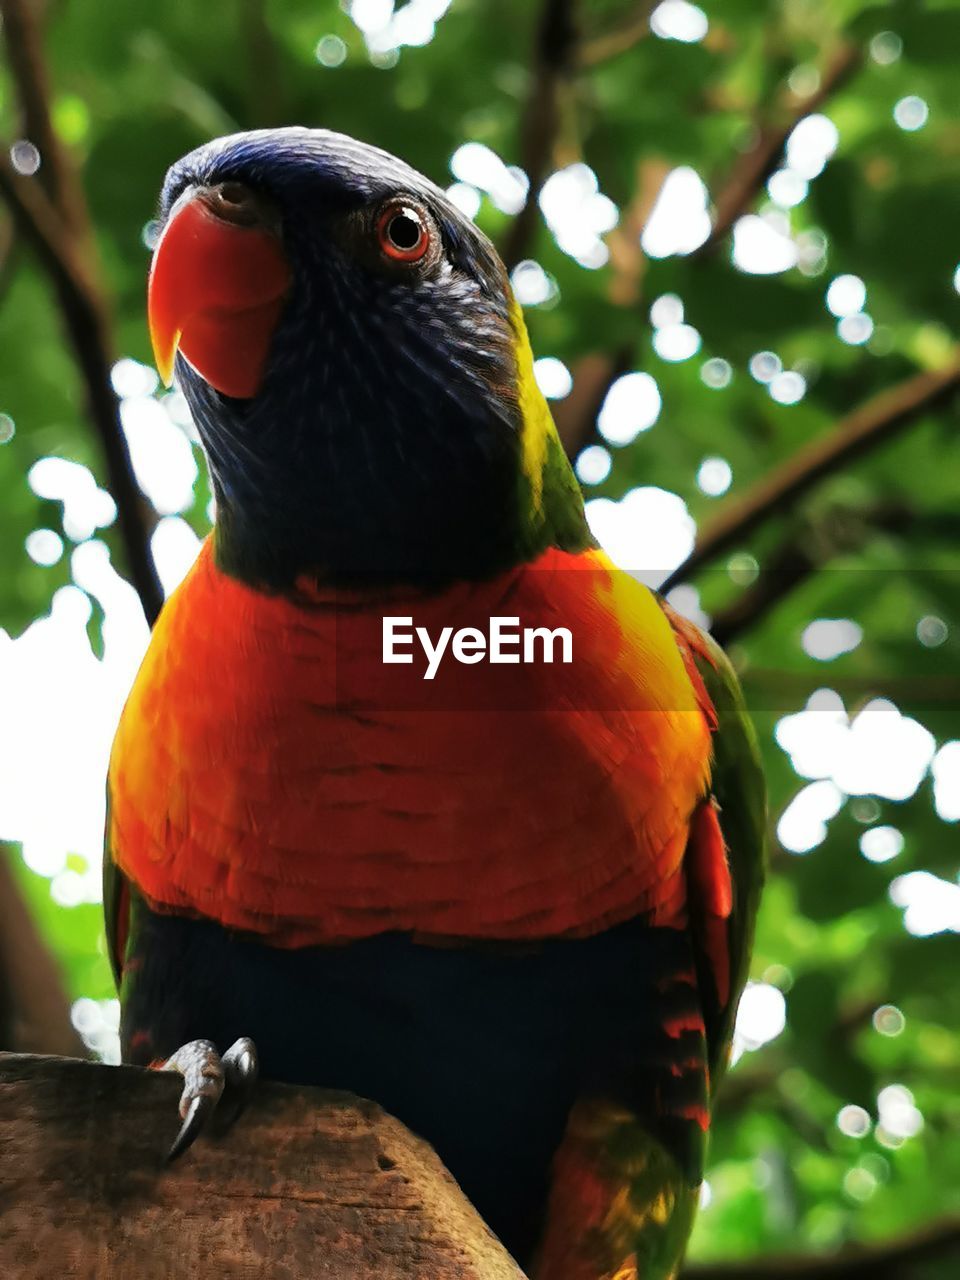 animal themes, animal, bird, pet, animal wildlife, parrot, one animal, beak, wildlife, tree, multi colored, nature, perching, branch, outdoors, plant, feather, no people, animal body part, forest, focus on foreground, green, red, close-up, rainforest, tropical bird, vibrant color, portrait, day, beauty in nature, tropical climate